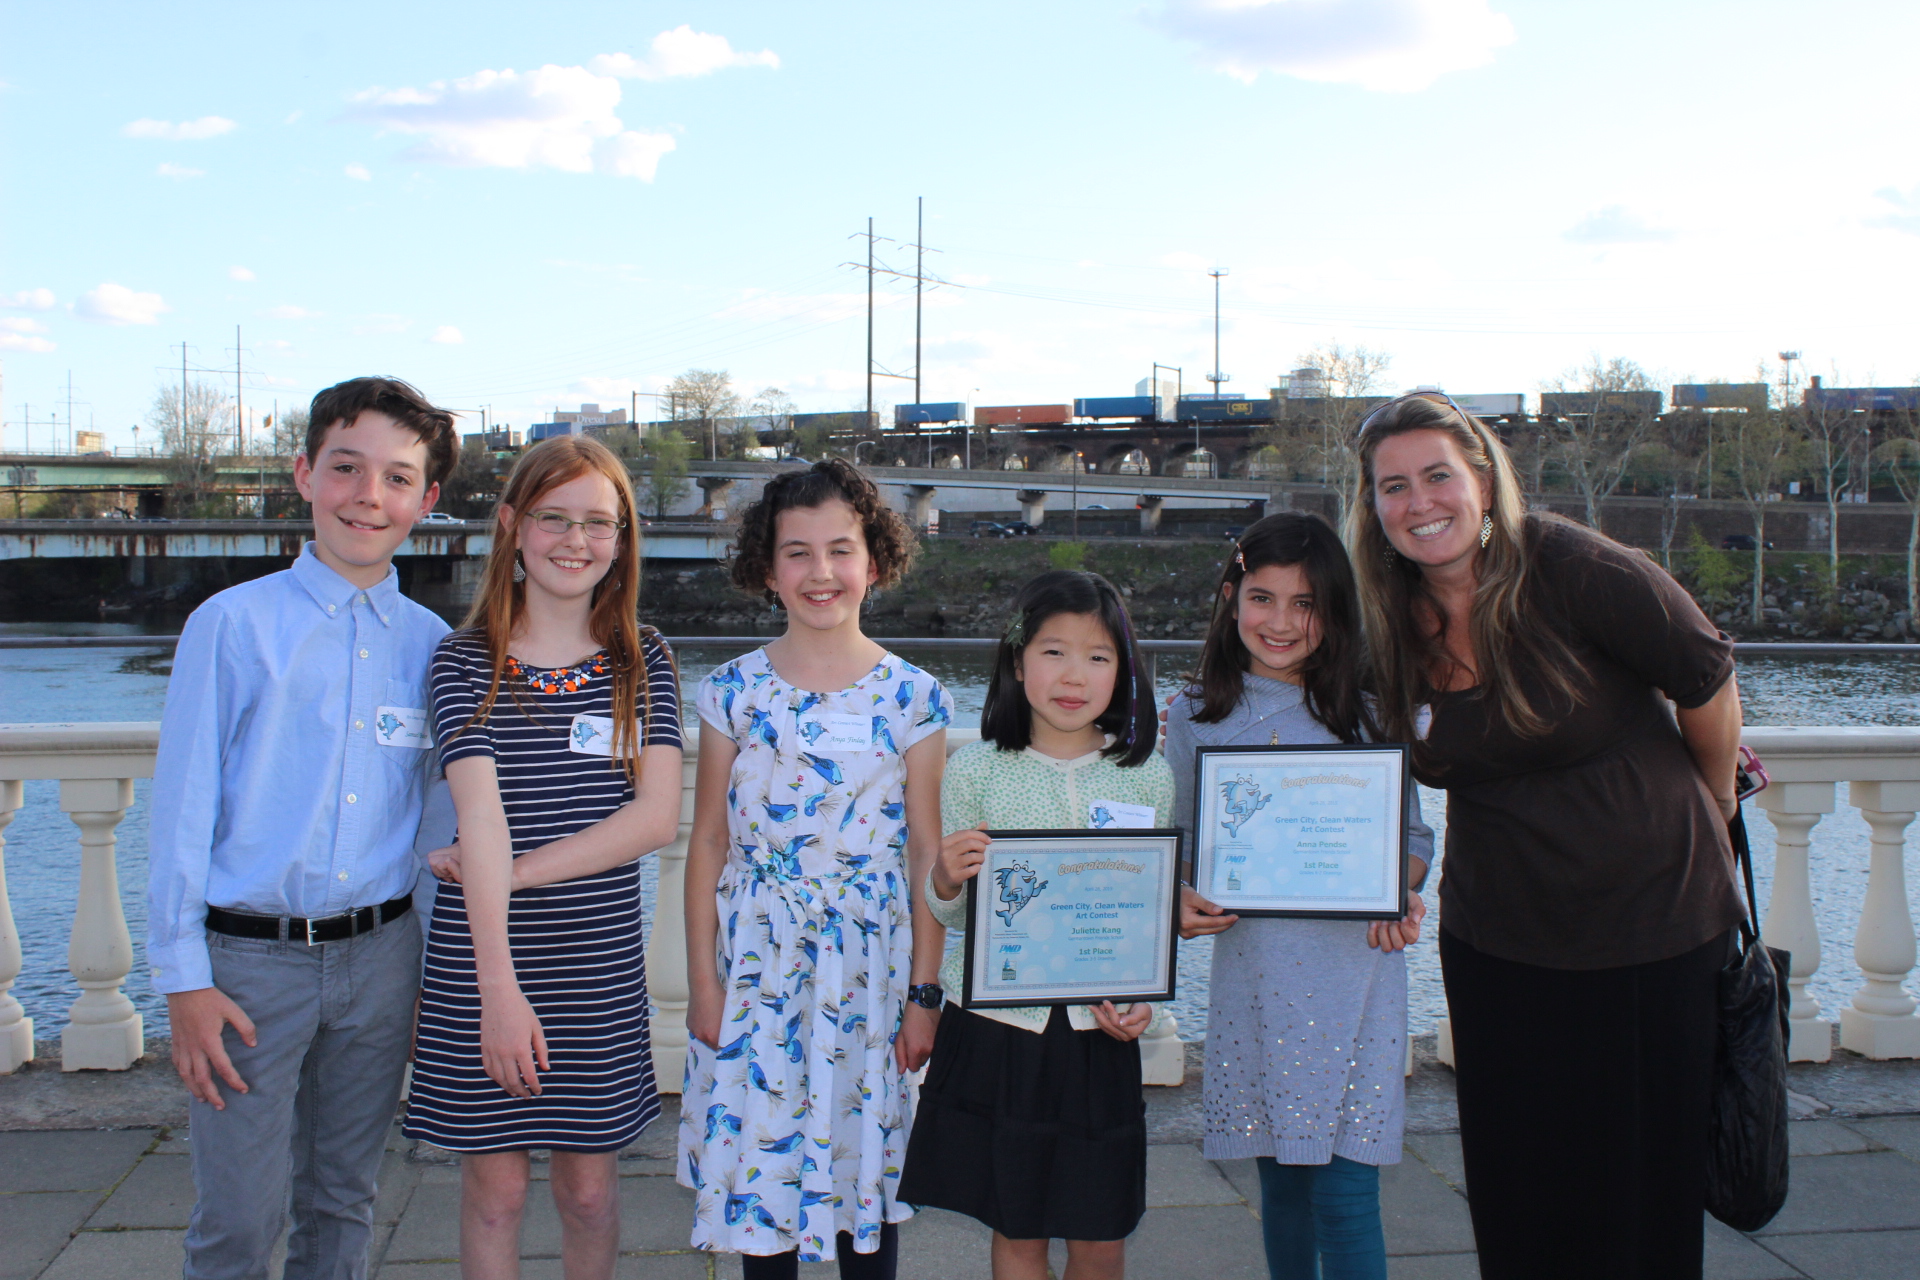 PWD Public Engagement Team Manager Tiffany Ledesma poses with the young winners of a Green City, Clean Waters art contest, with the Schulkill River in the background.